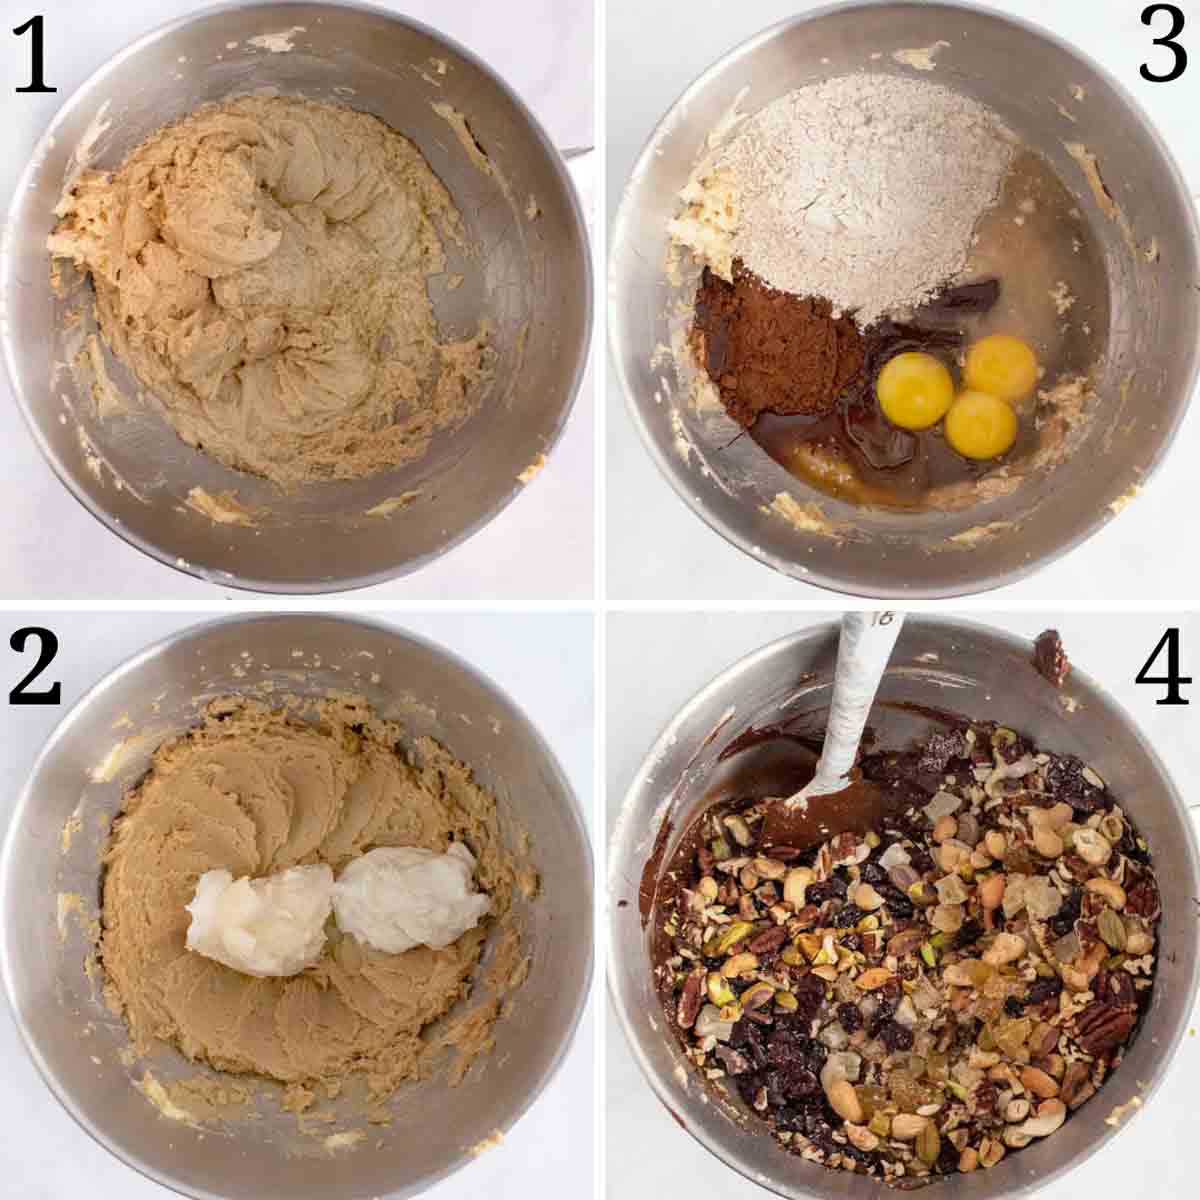 four images showing the next steps in making a chocolate torte